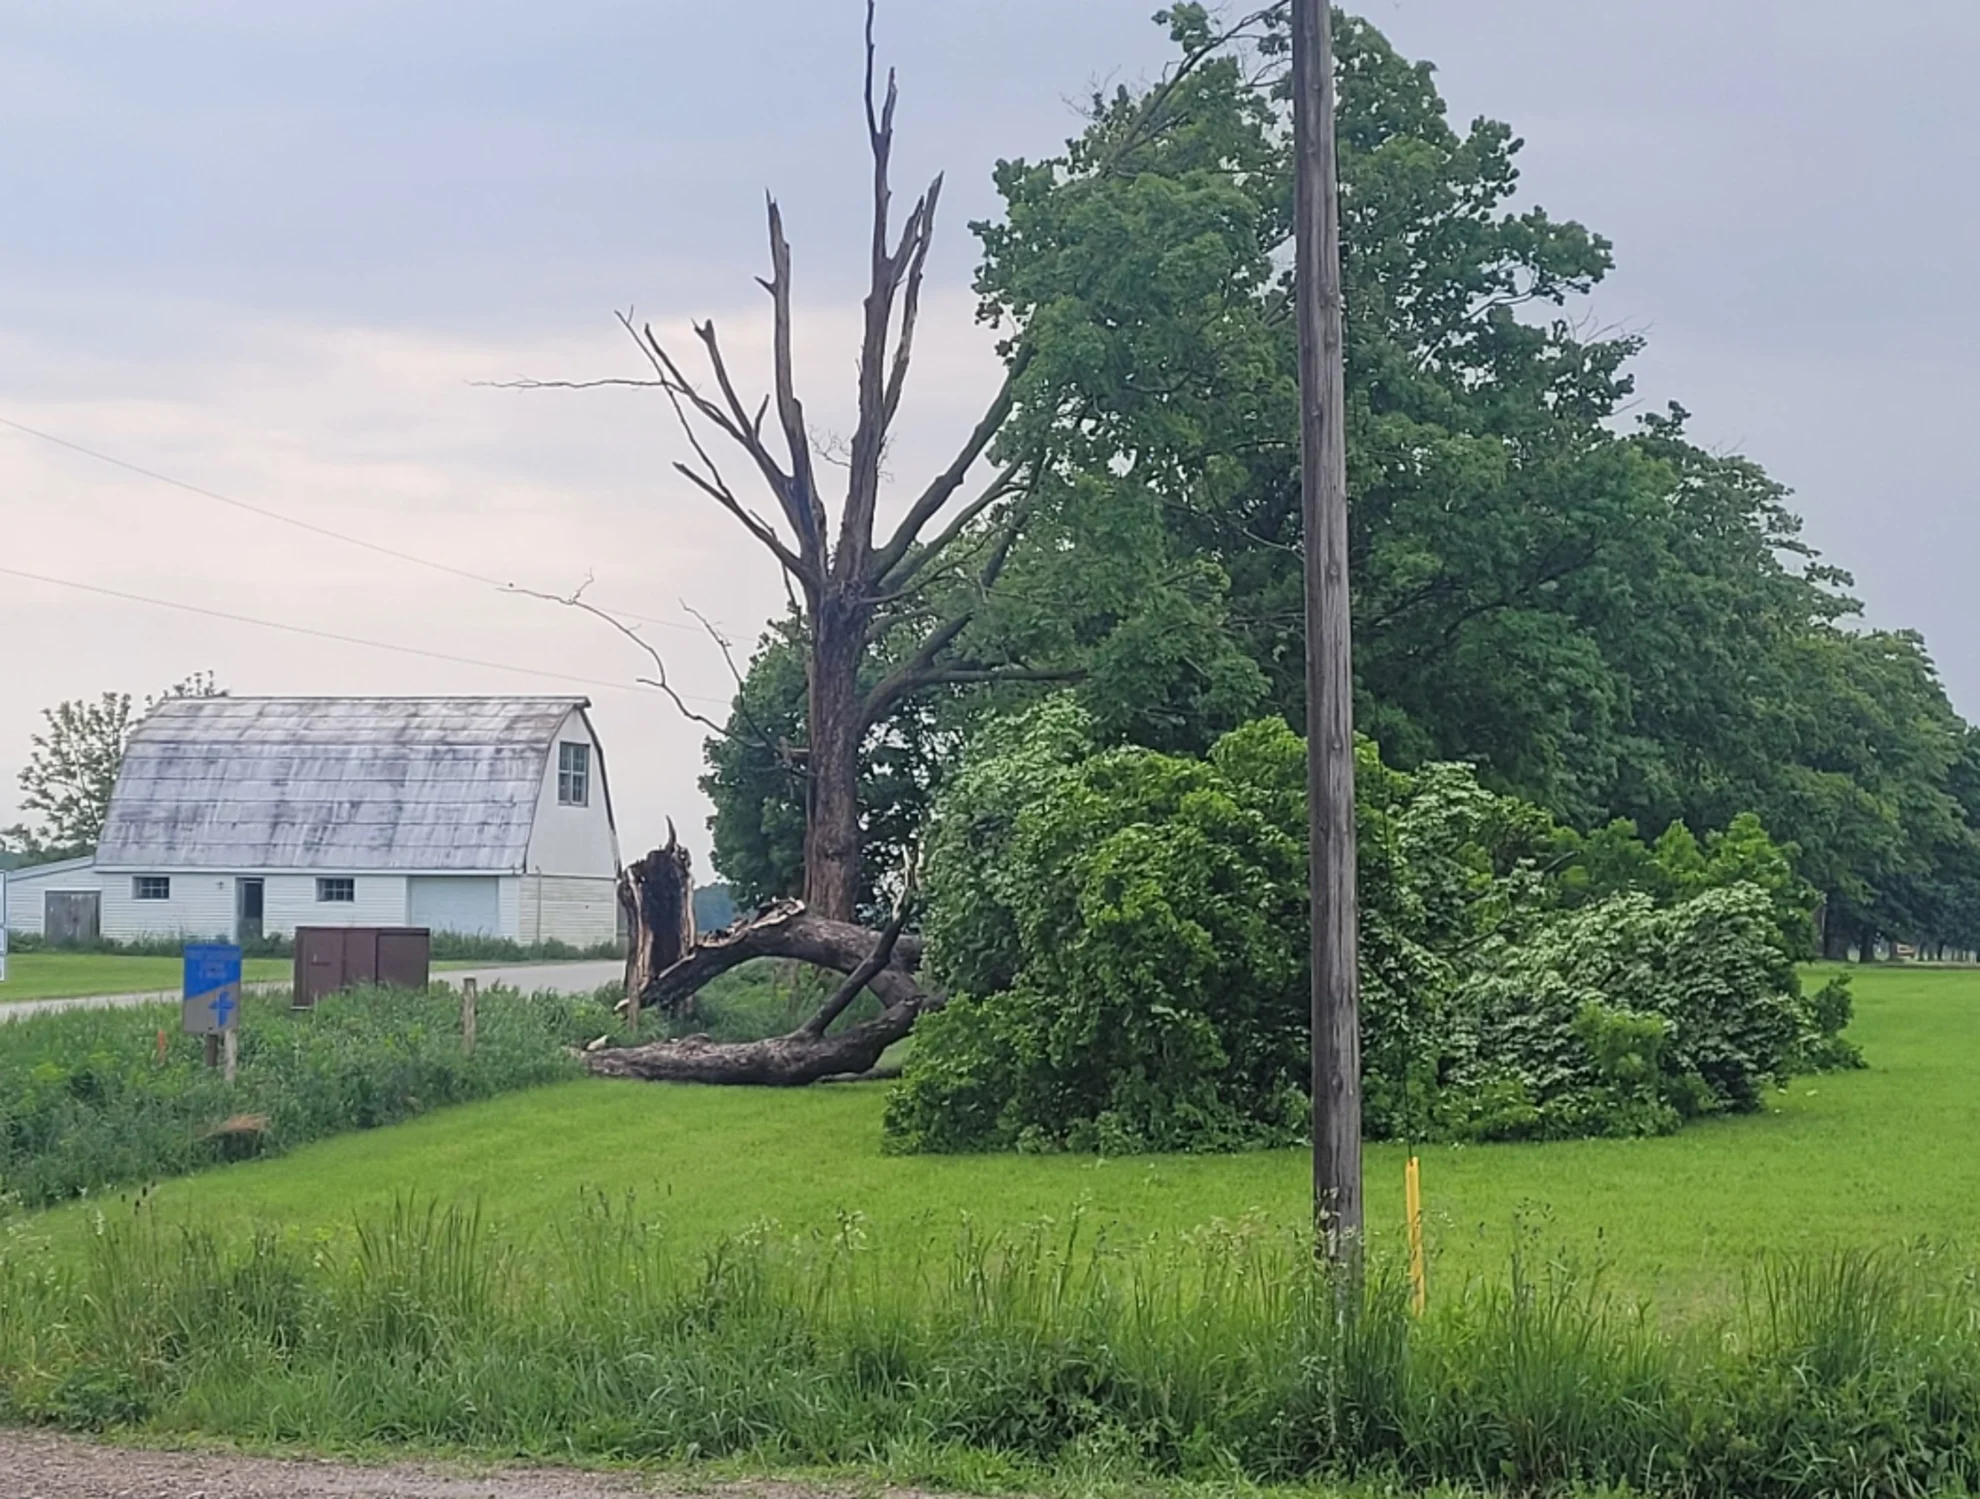 Quebec's first tornado of the year reported amid Monday's damaging storms. See the impacts, here